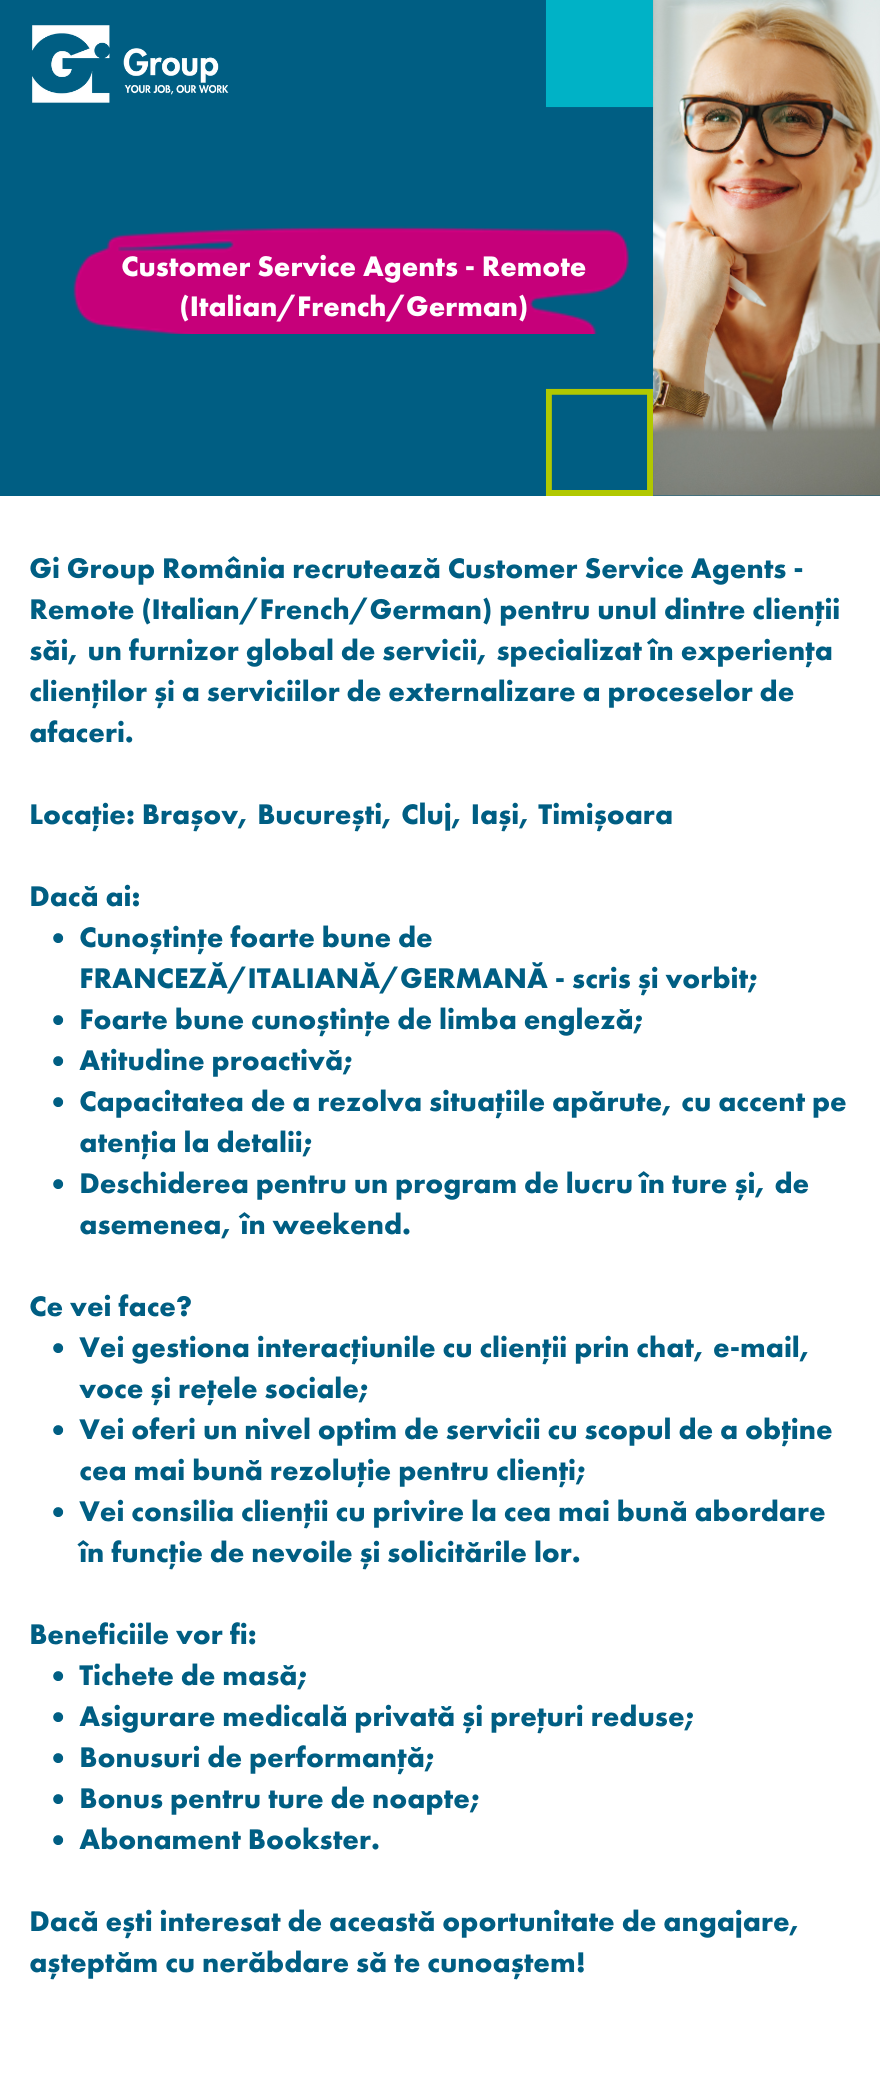 Customer Service Agents – REMOTE (Italian, French, German)